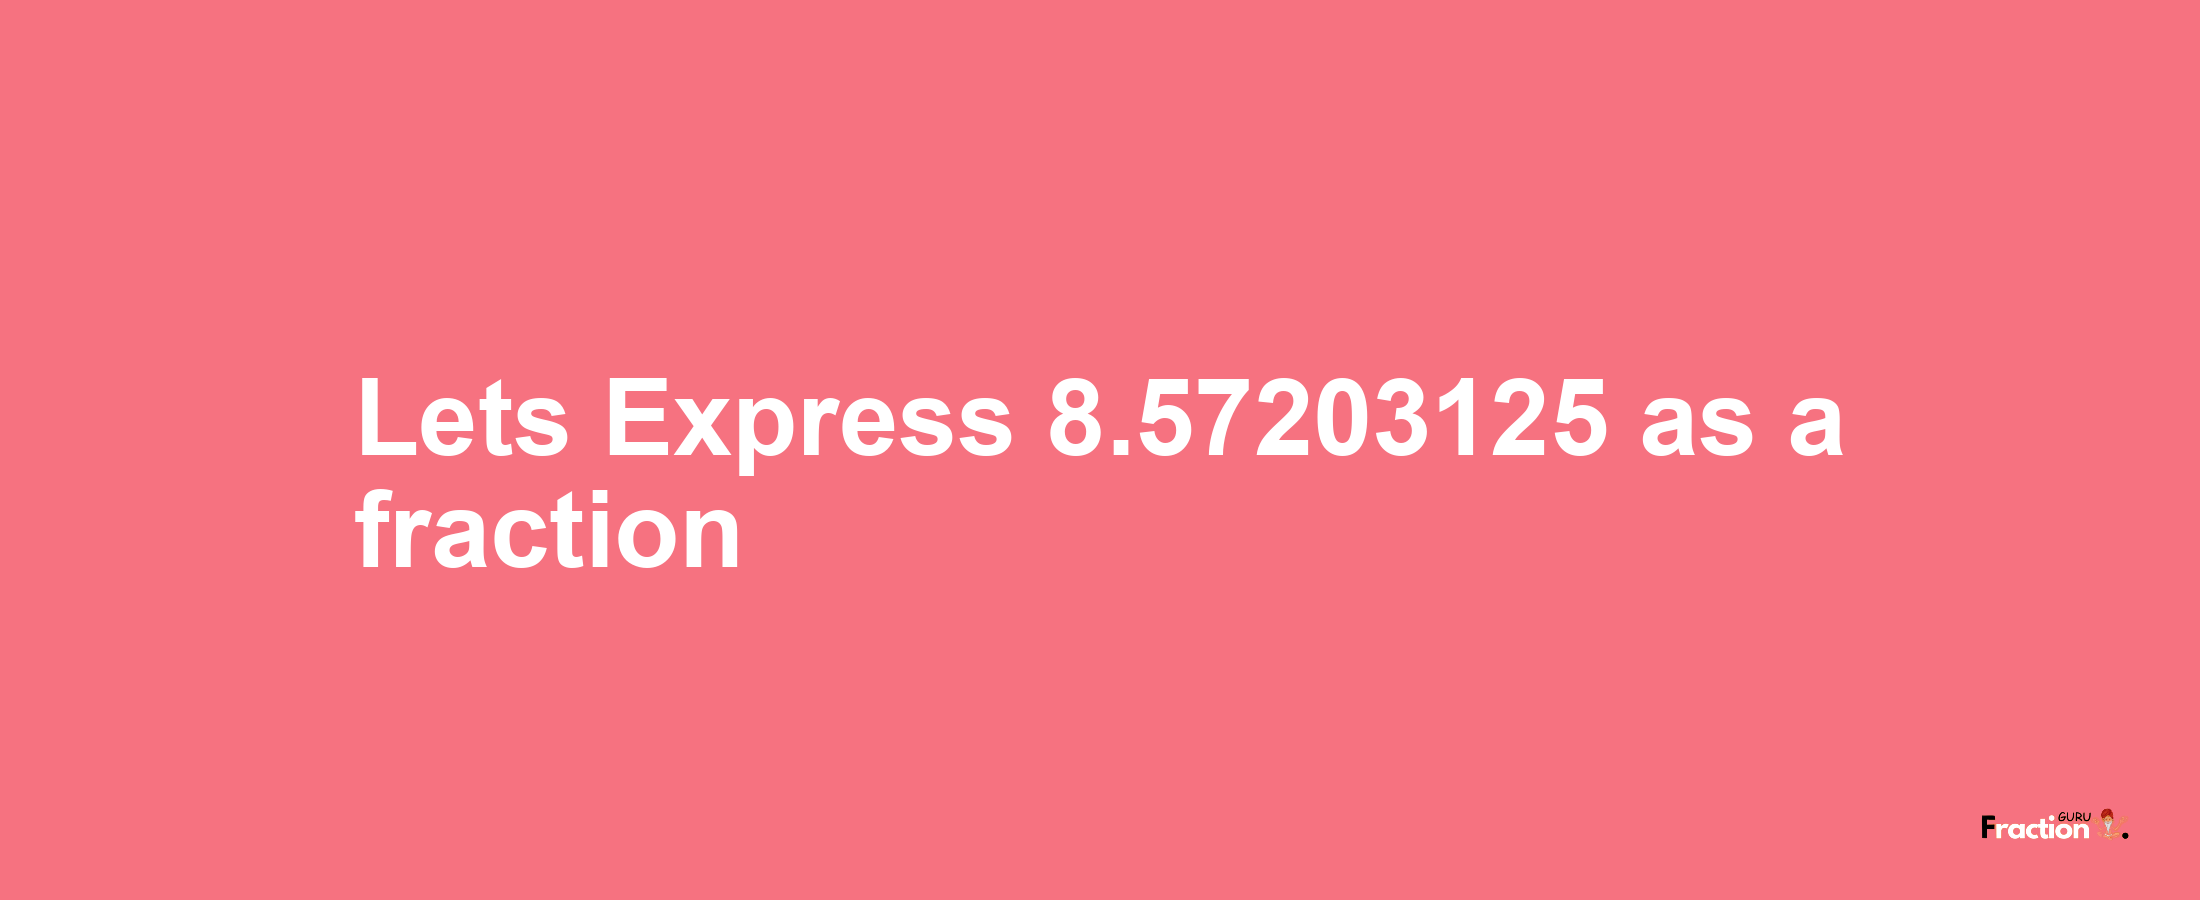 Lets Express 8.57203125 as afraction